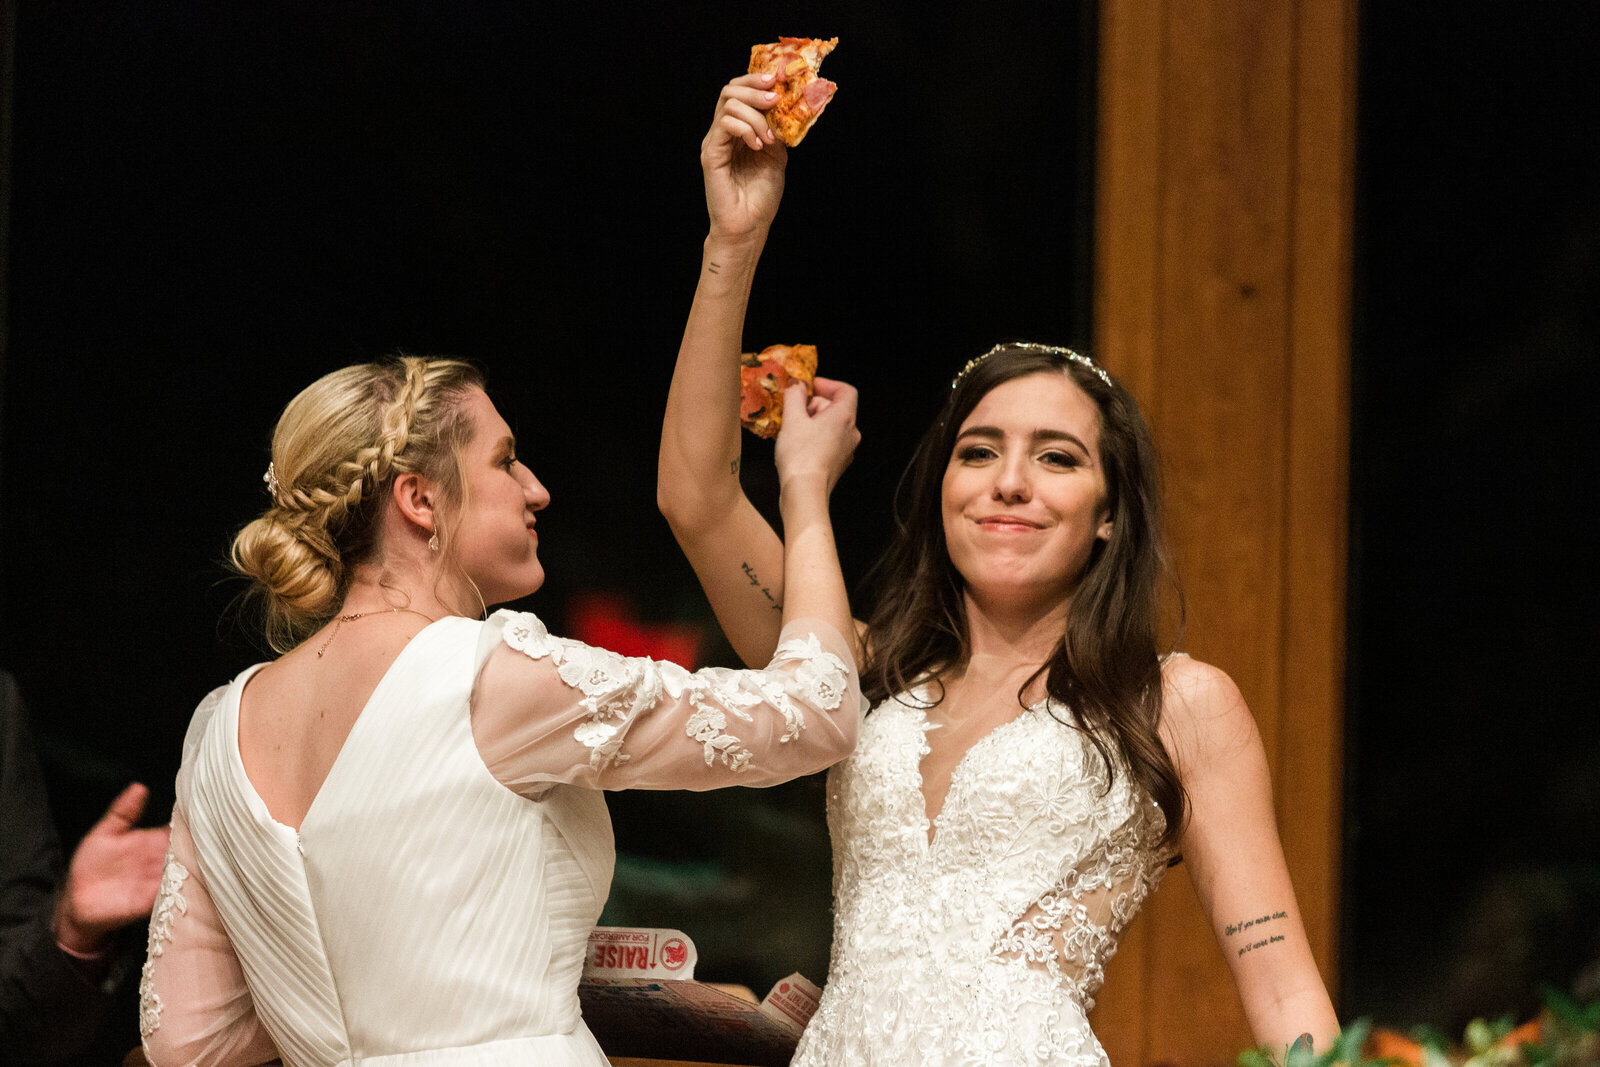 Two brides sharing "unity pizza" during their wedding ceremony. The bride on the left is wearing a mid-sleeve white dress while the bride on the right is wearing a sleeveless white dress. Both are holding up their respective slices of pizza joyfully in the air.